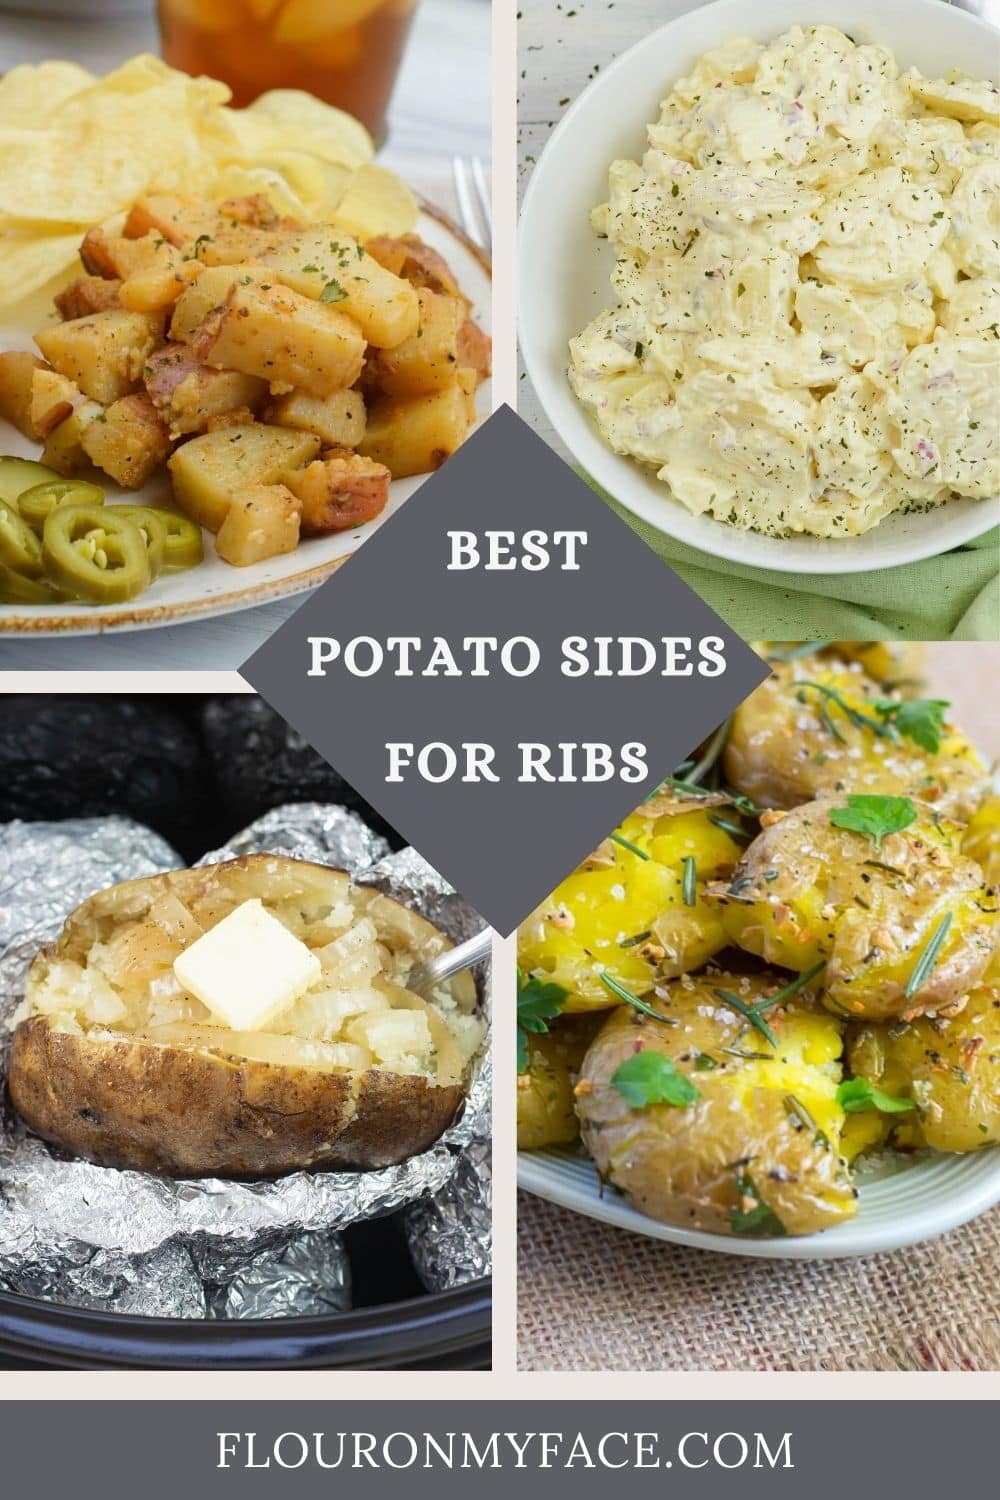 Large featured image with 4 previews of Potato Sides for ribs.